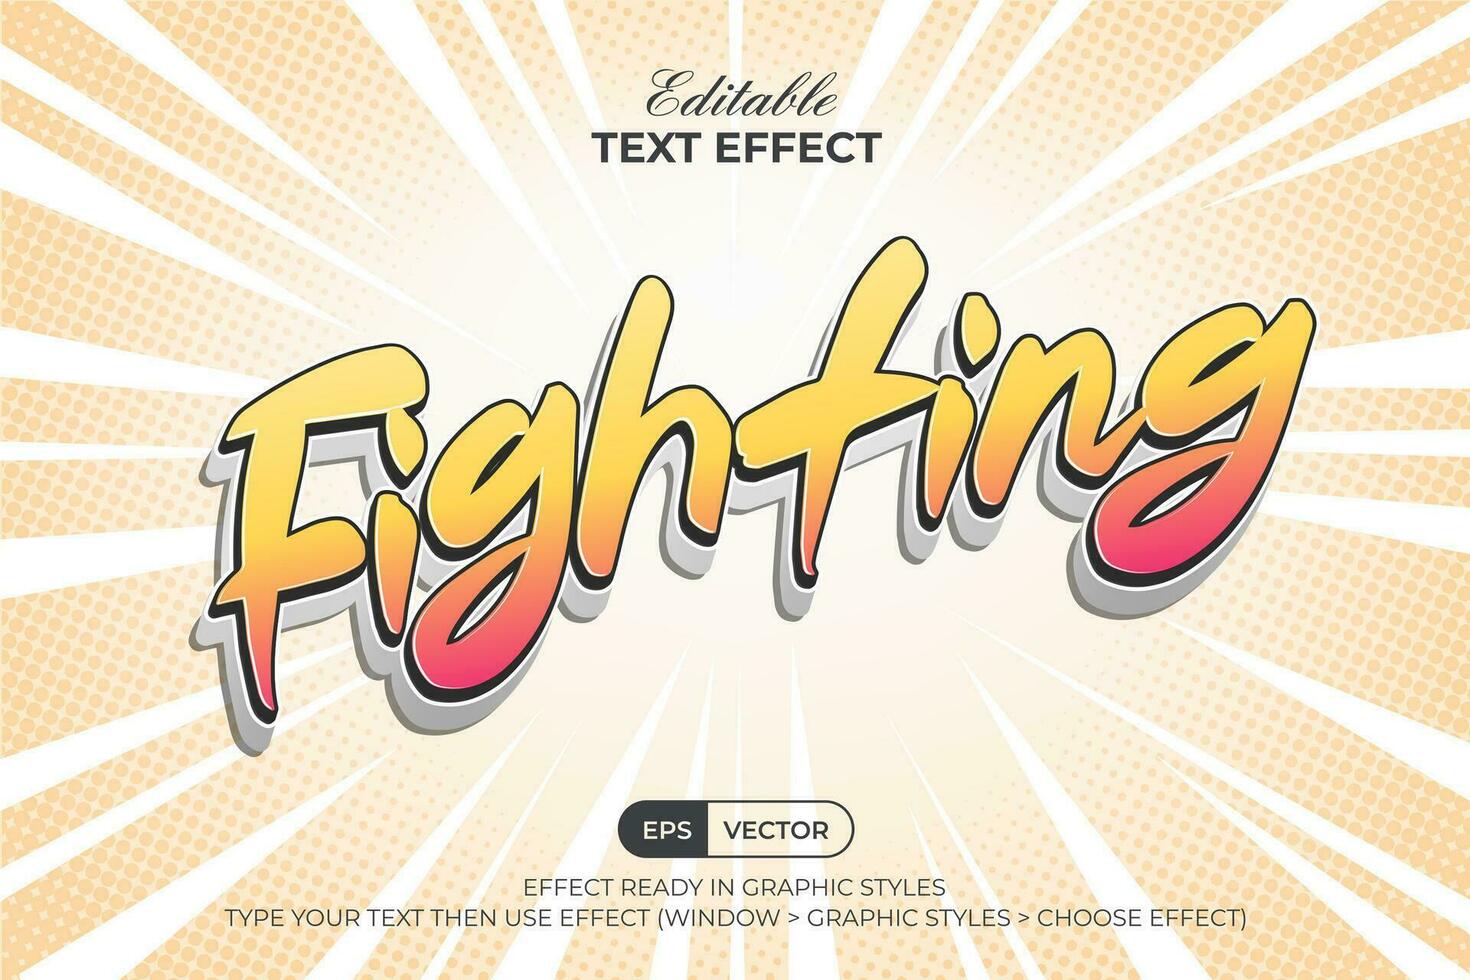 Fighting text effect comic style. Editable text effect vector. vector